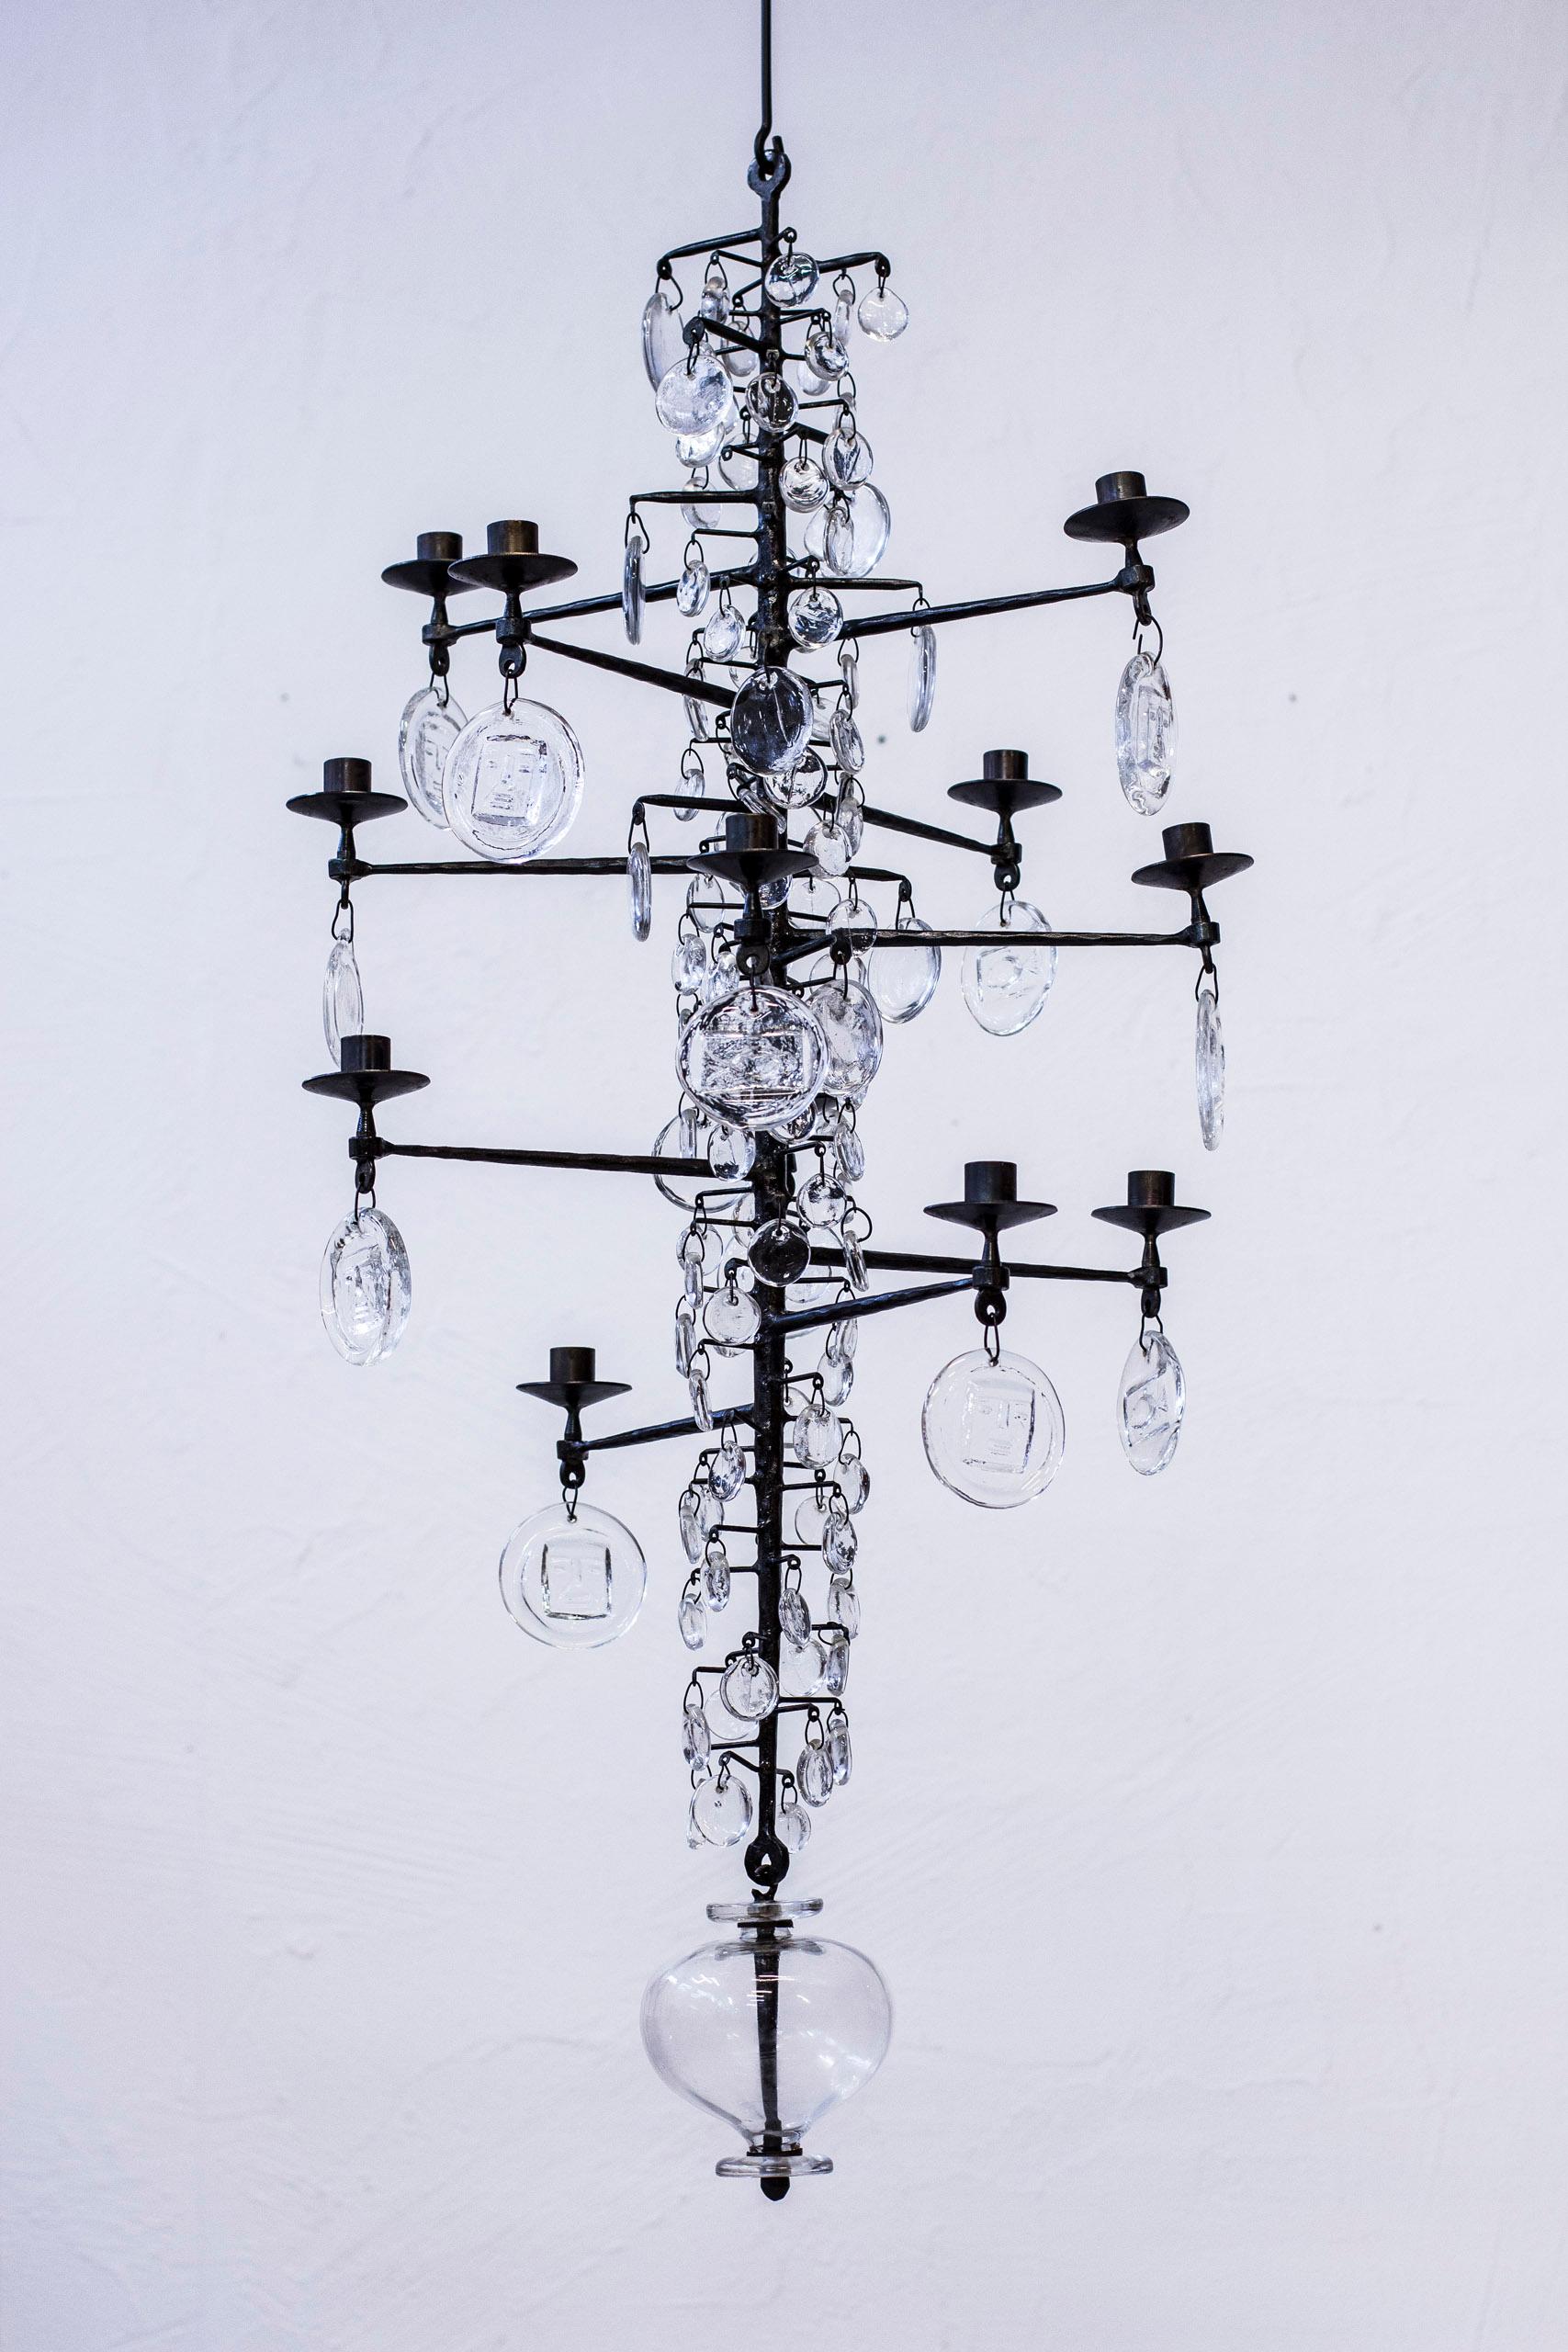 Large twelve-armed chandelier designed by Erik Höglund. Produced in Sweden by Boda Smide. Made from wrought iron and handblown clear glass with Höglund signature motifs of faces and figures. Excellent original condition with light age related